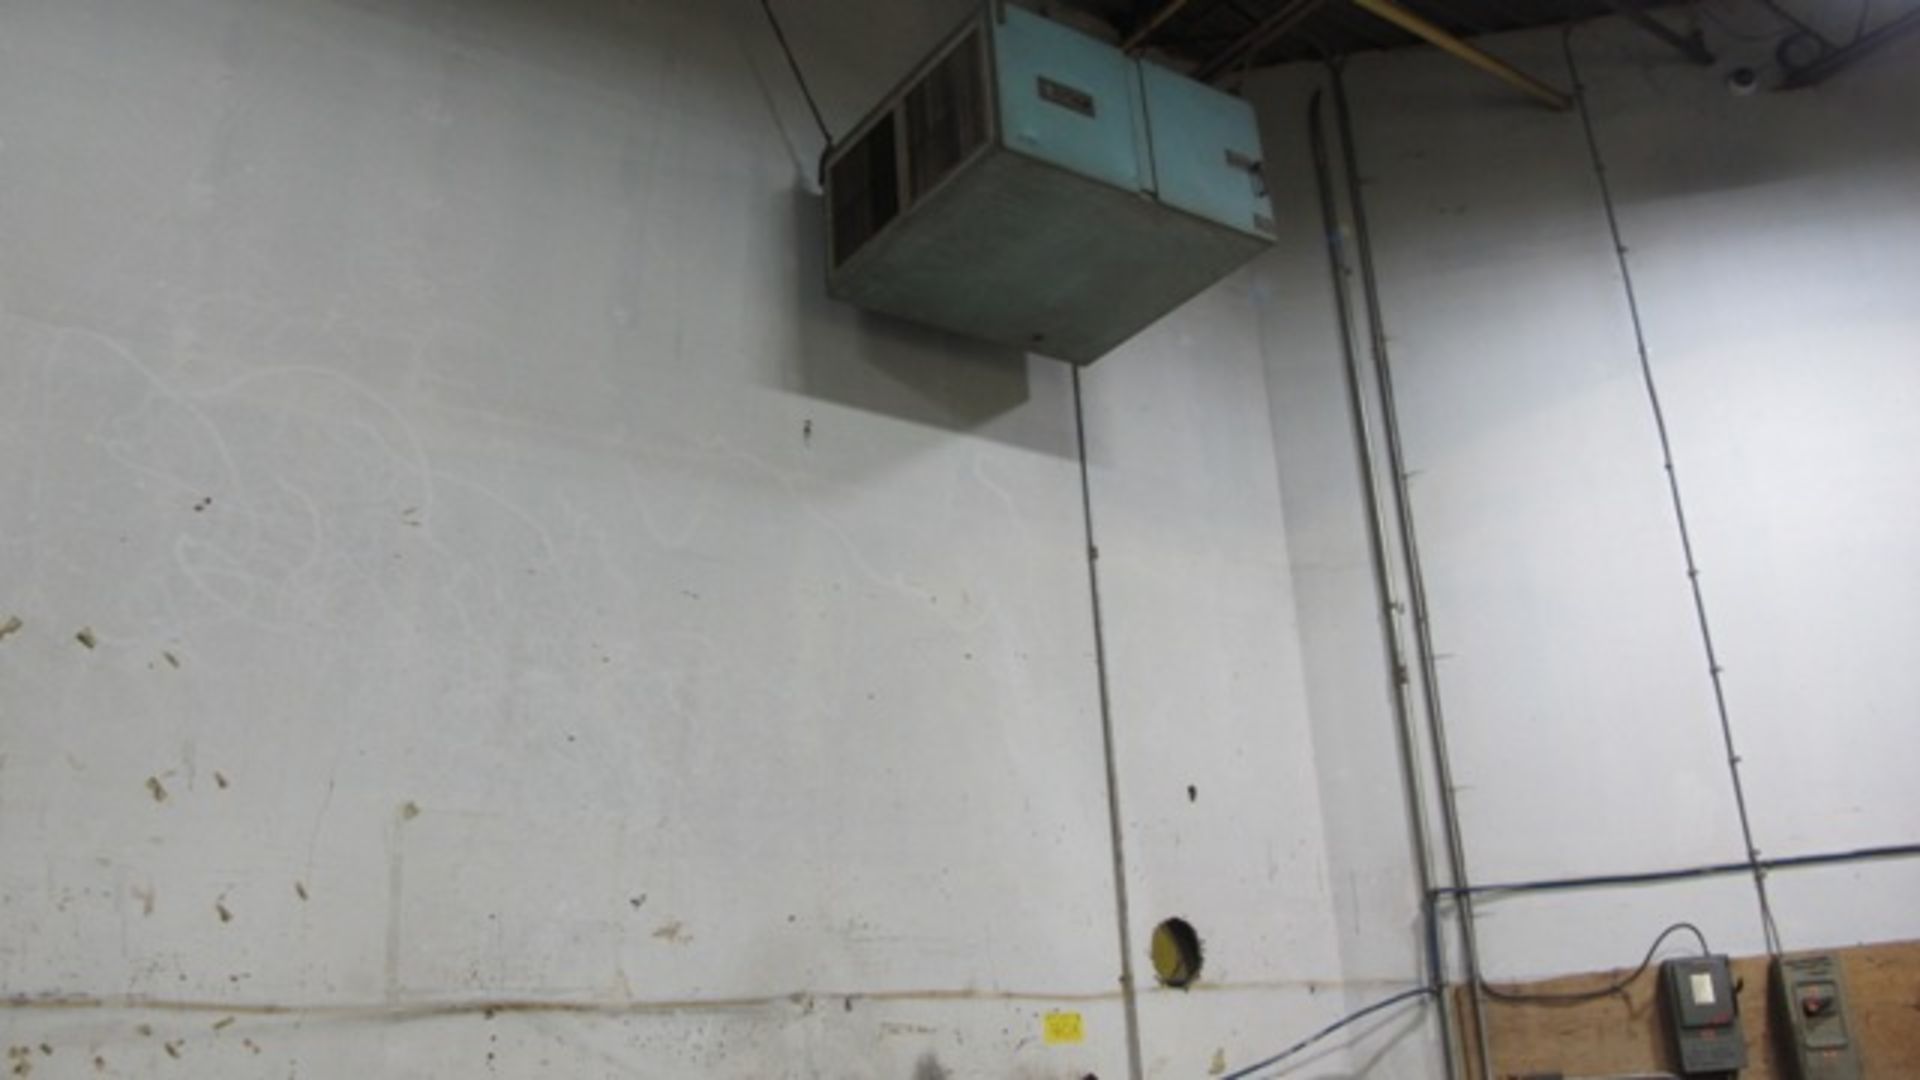 2 HANGING ELECTRIC AIR FILTERS